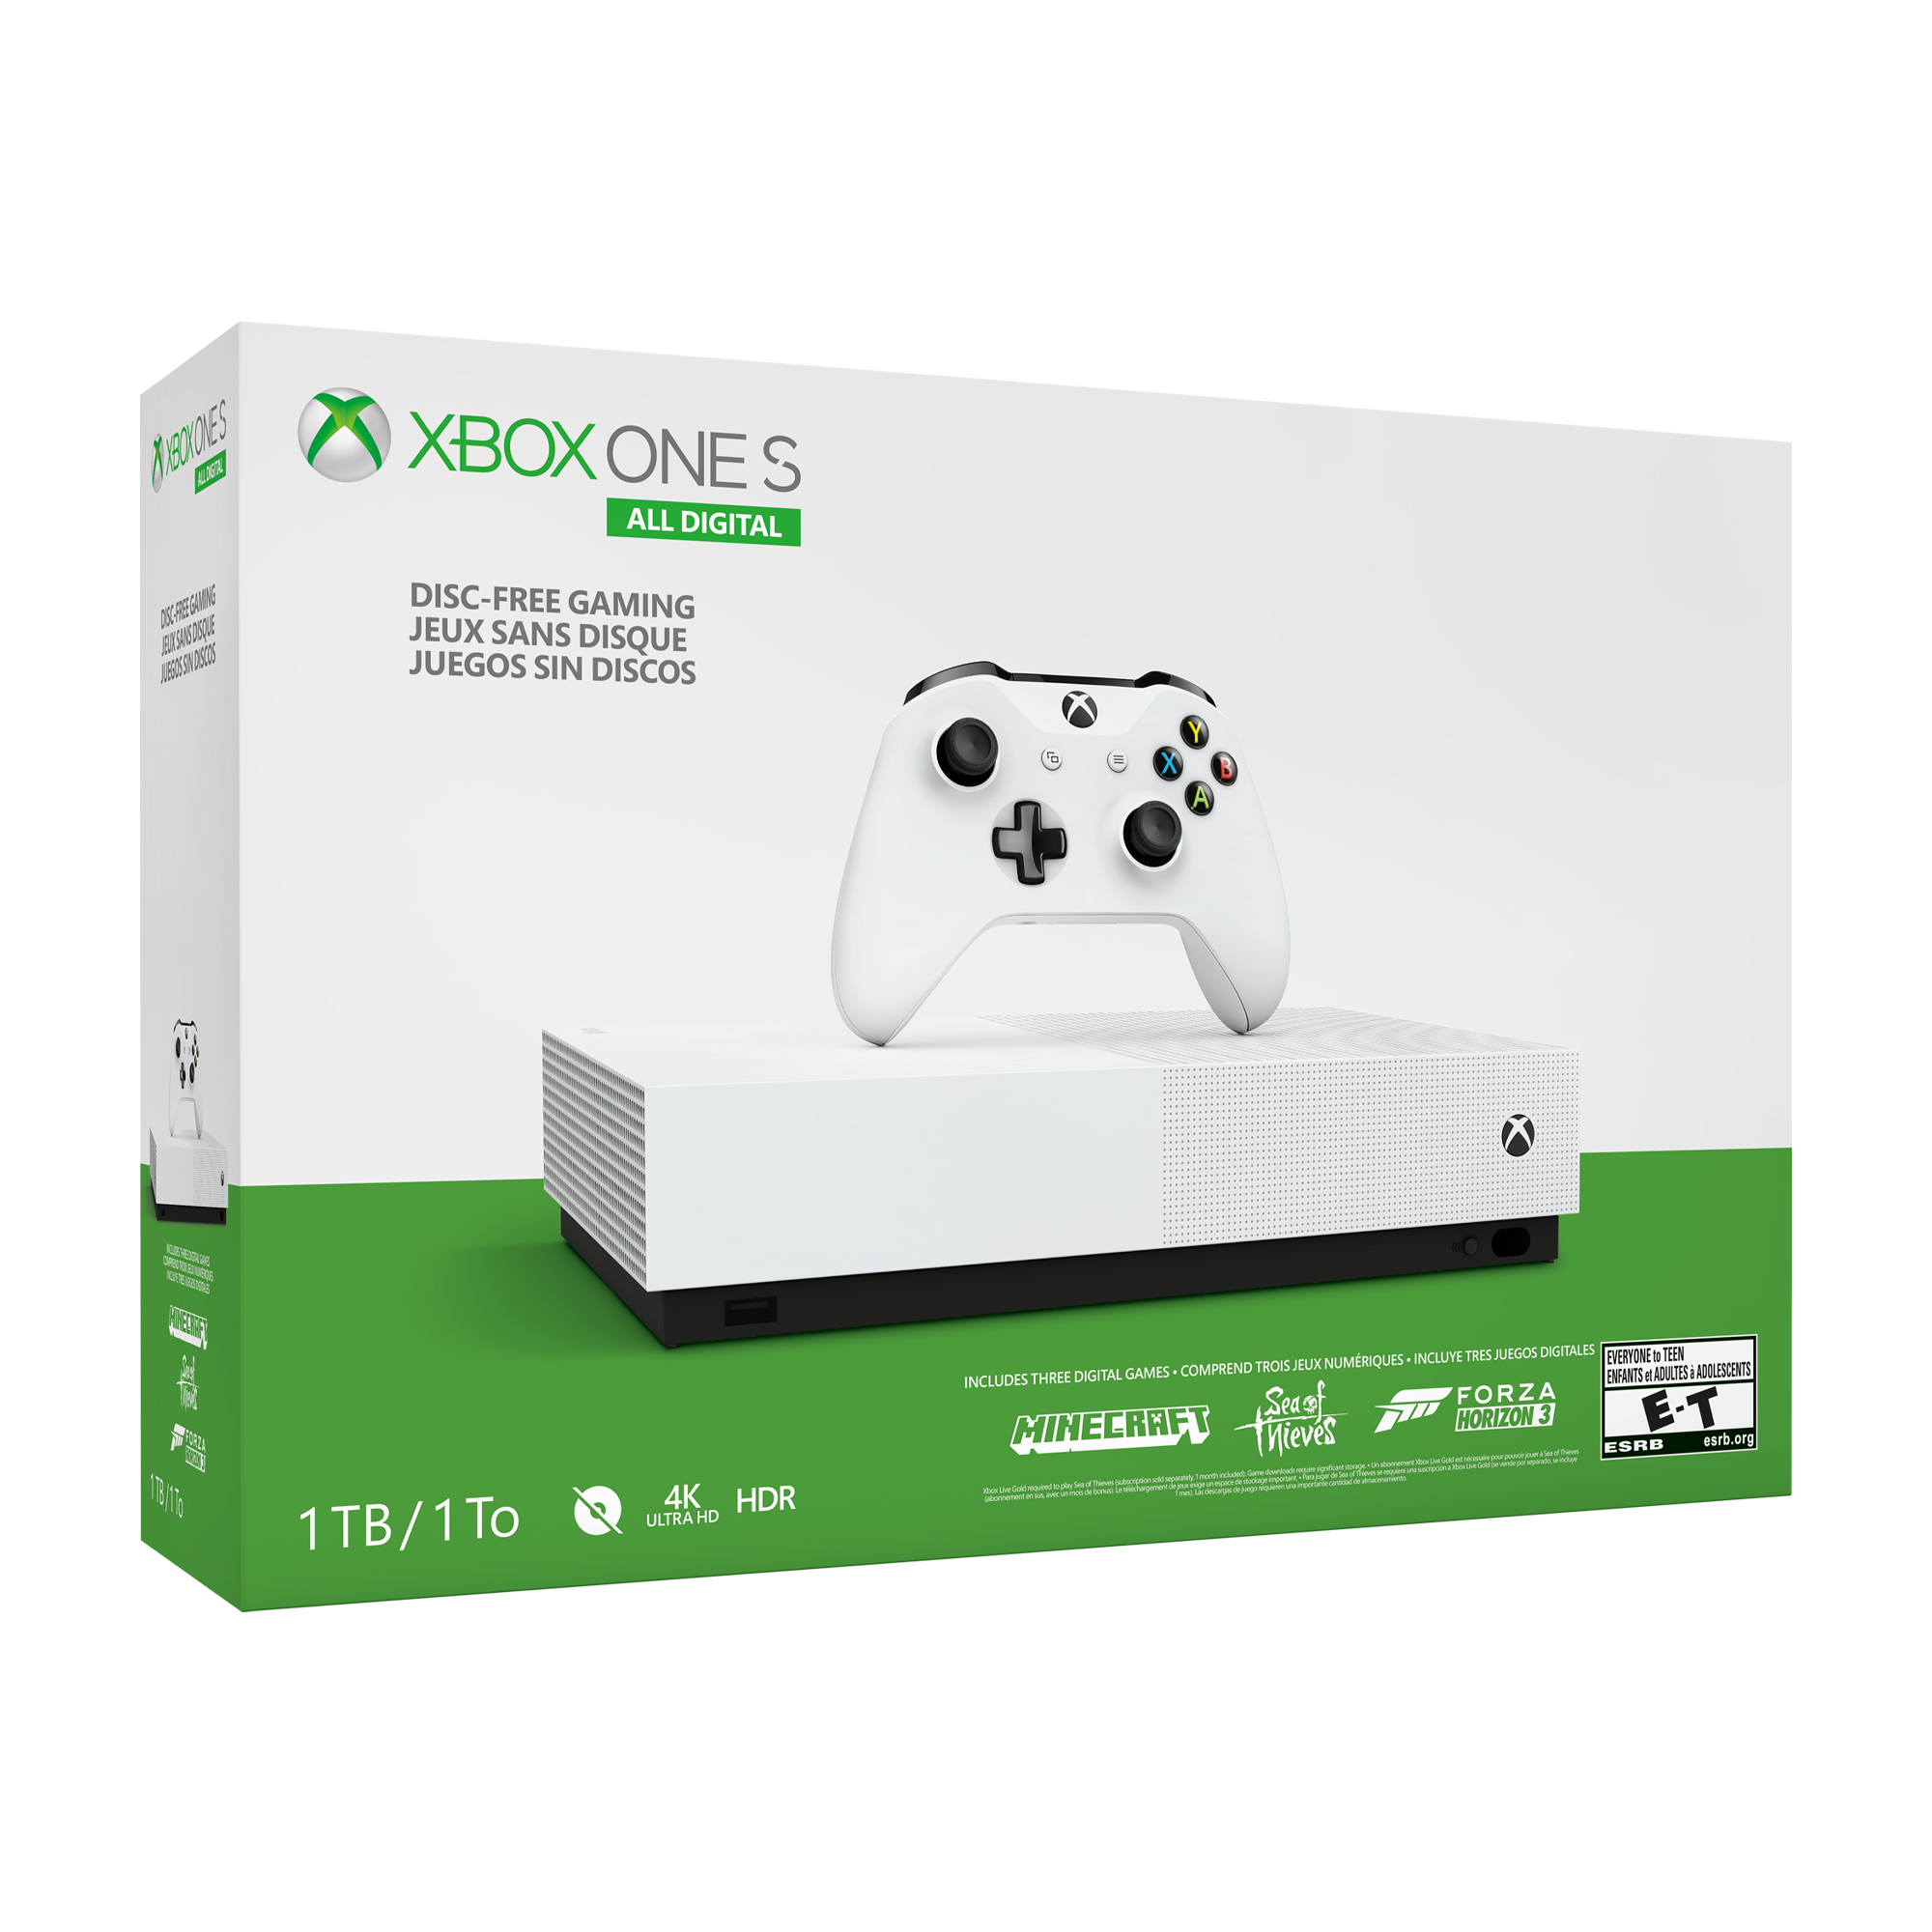 Restored Microsoft Xbox One S 1TB All-Digital Edition Console (Disc-free Gaming), White, NJP-00024 (Refurbished) - image 1 of 1